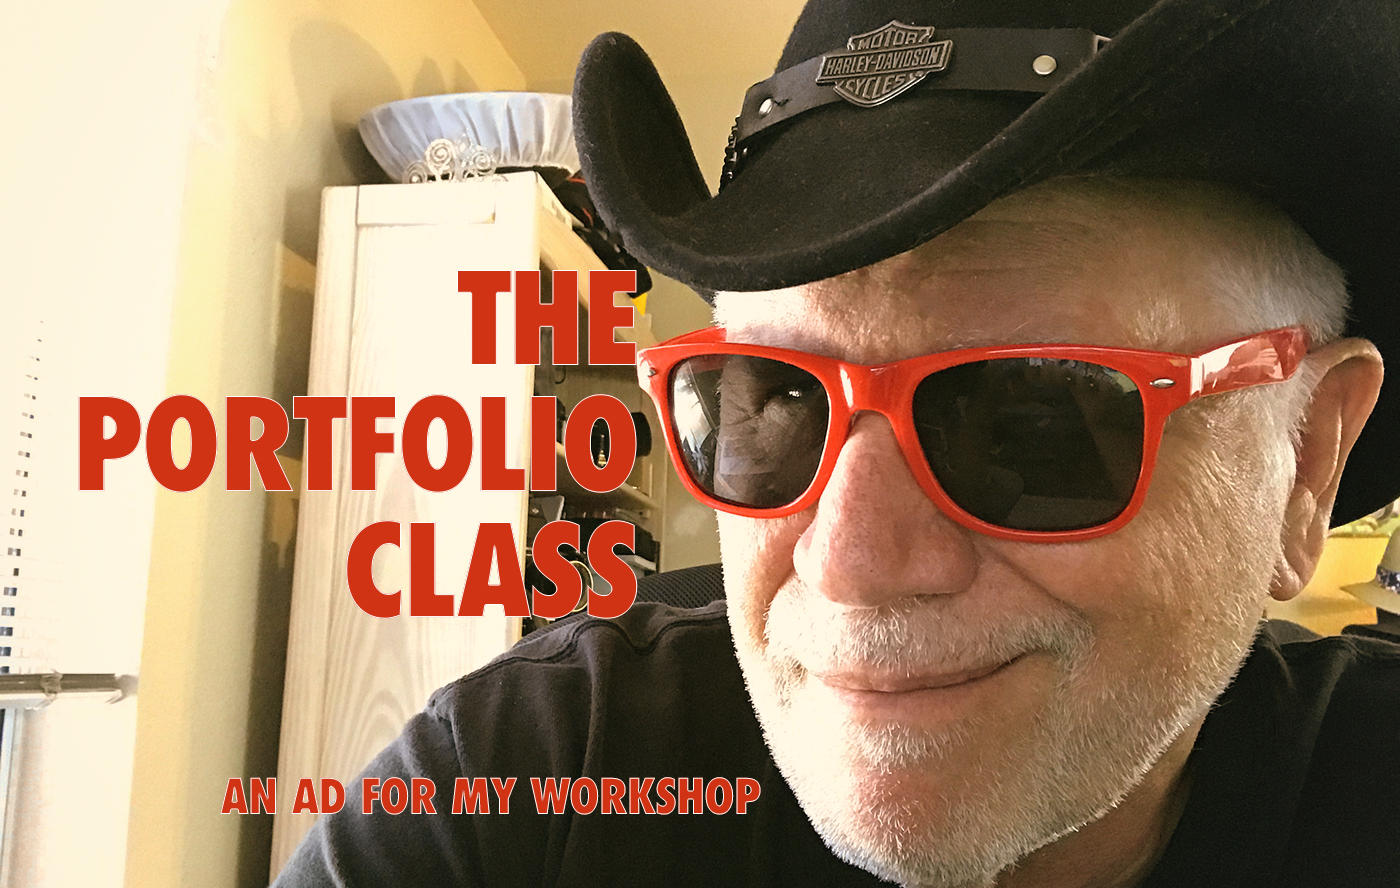 The Portfolio Workshop is Coming Up